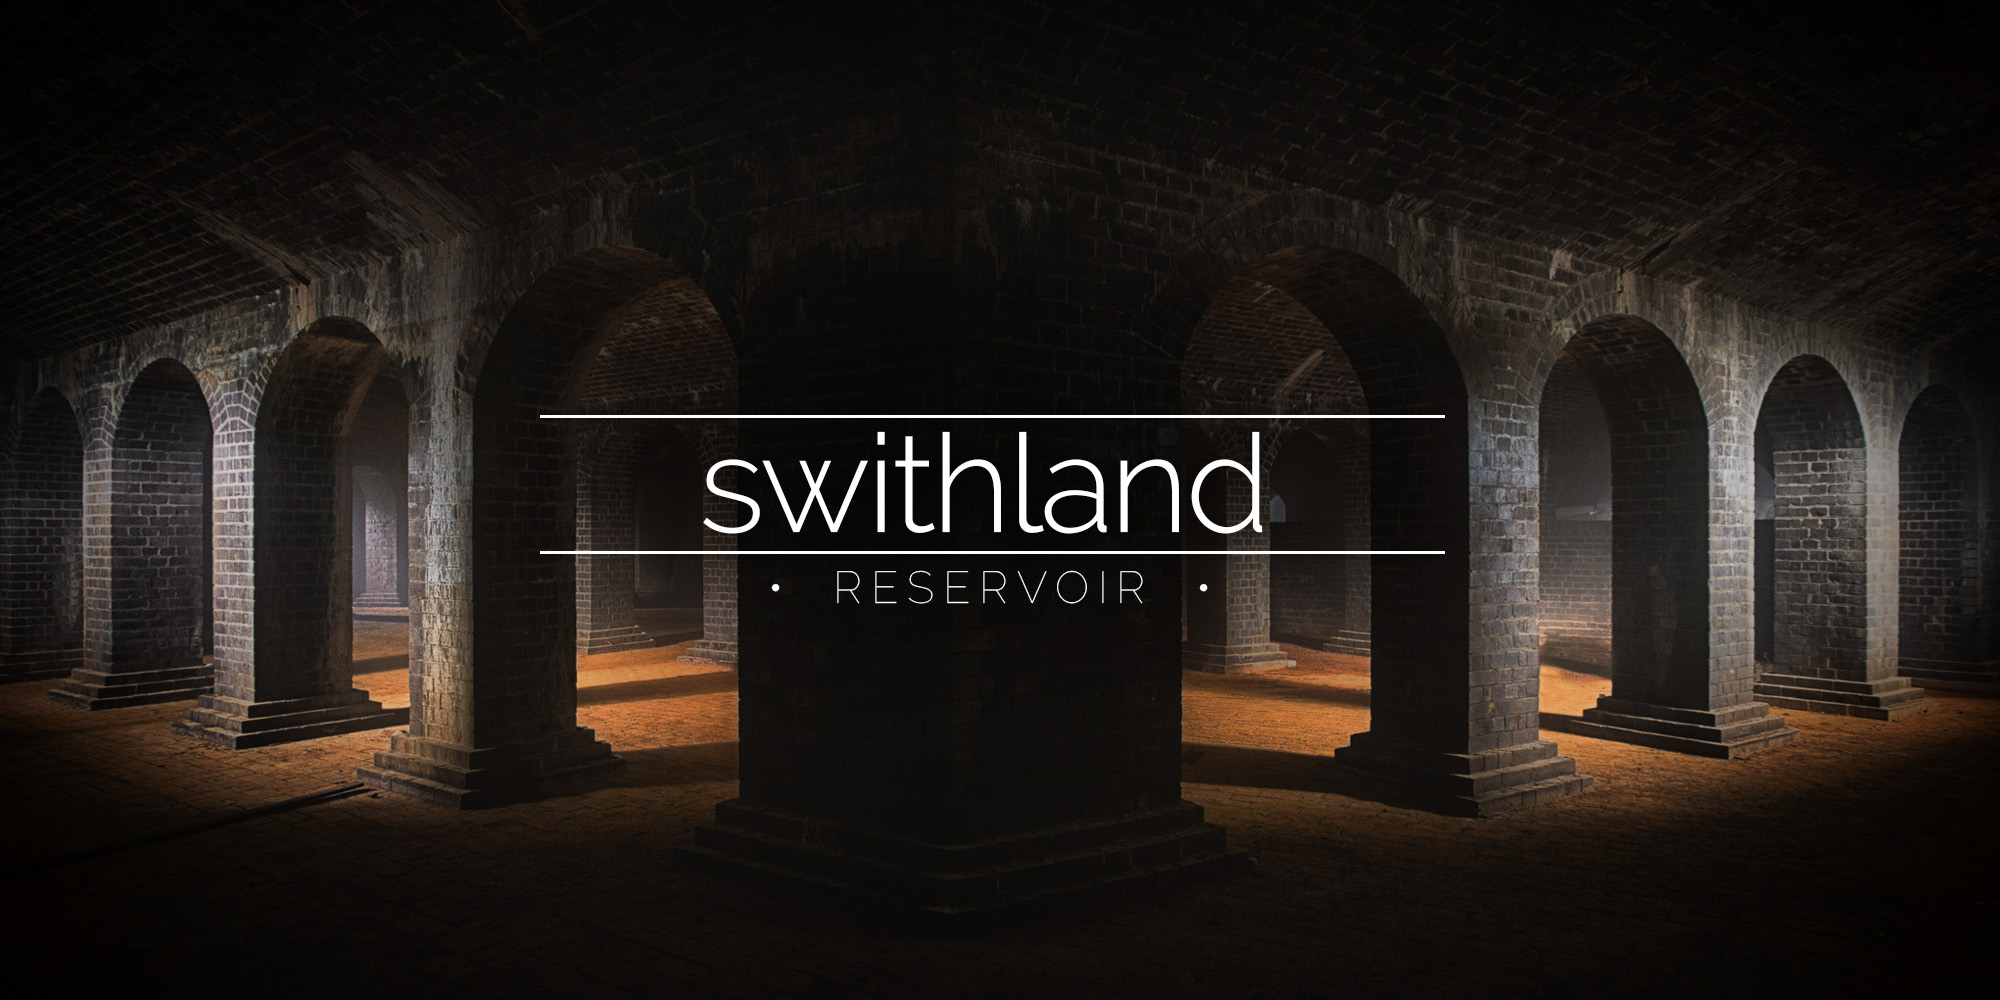 Swithland Reservoir, Leicestershire